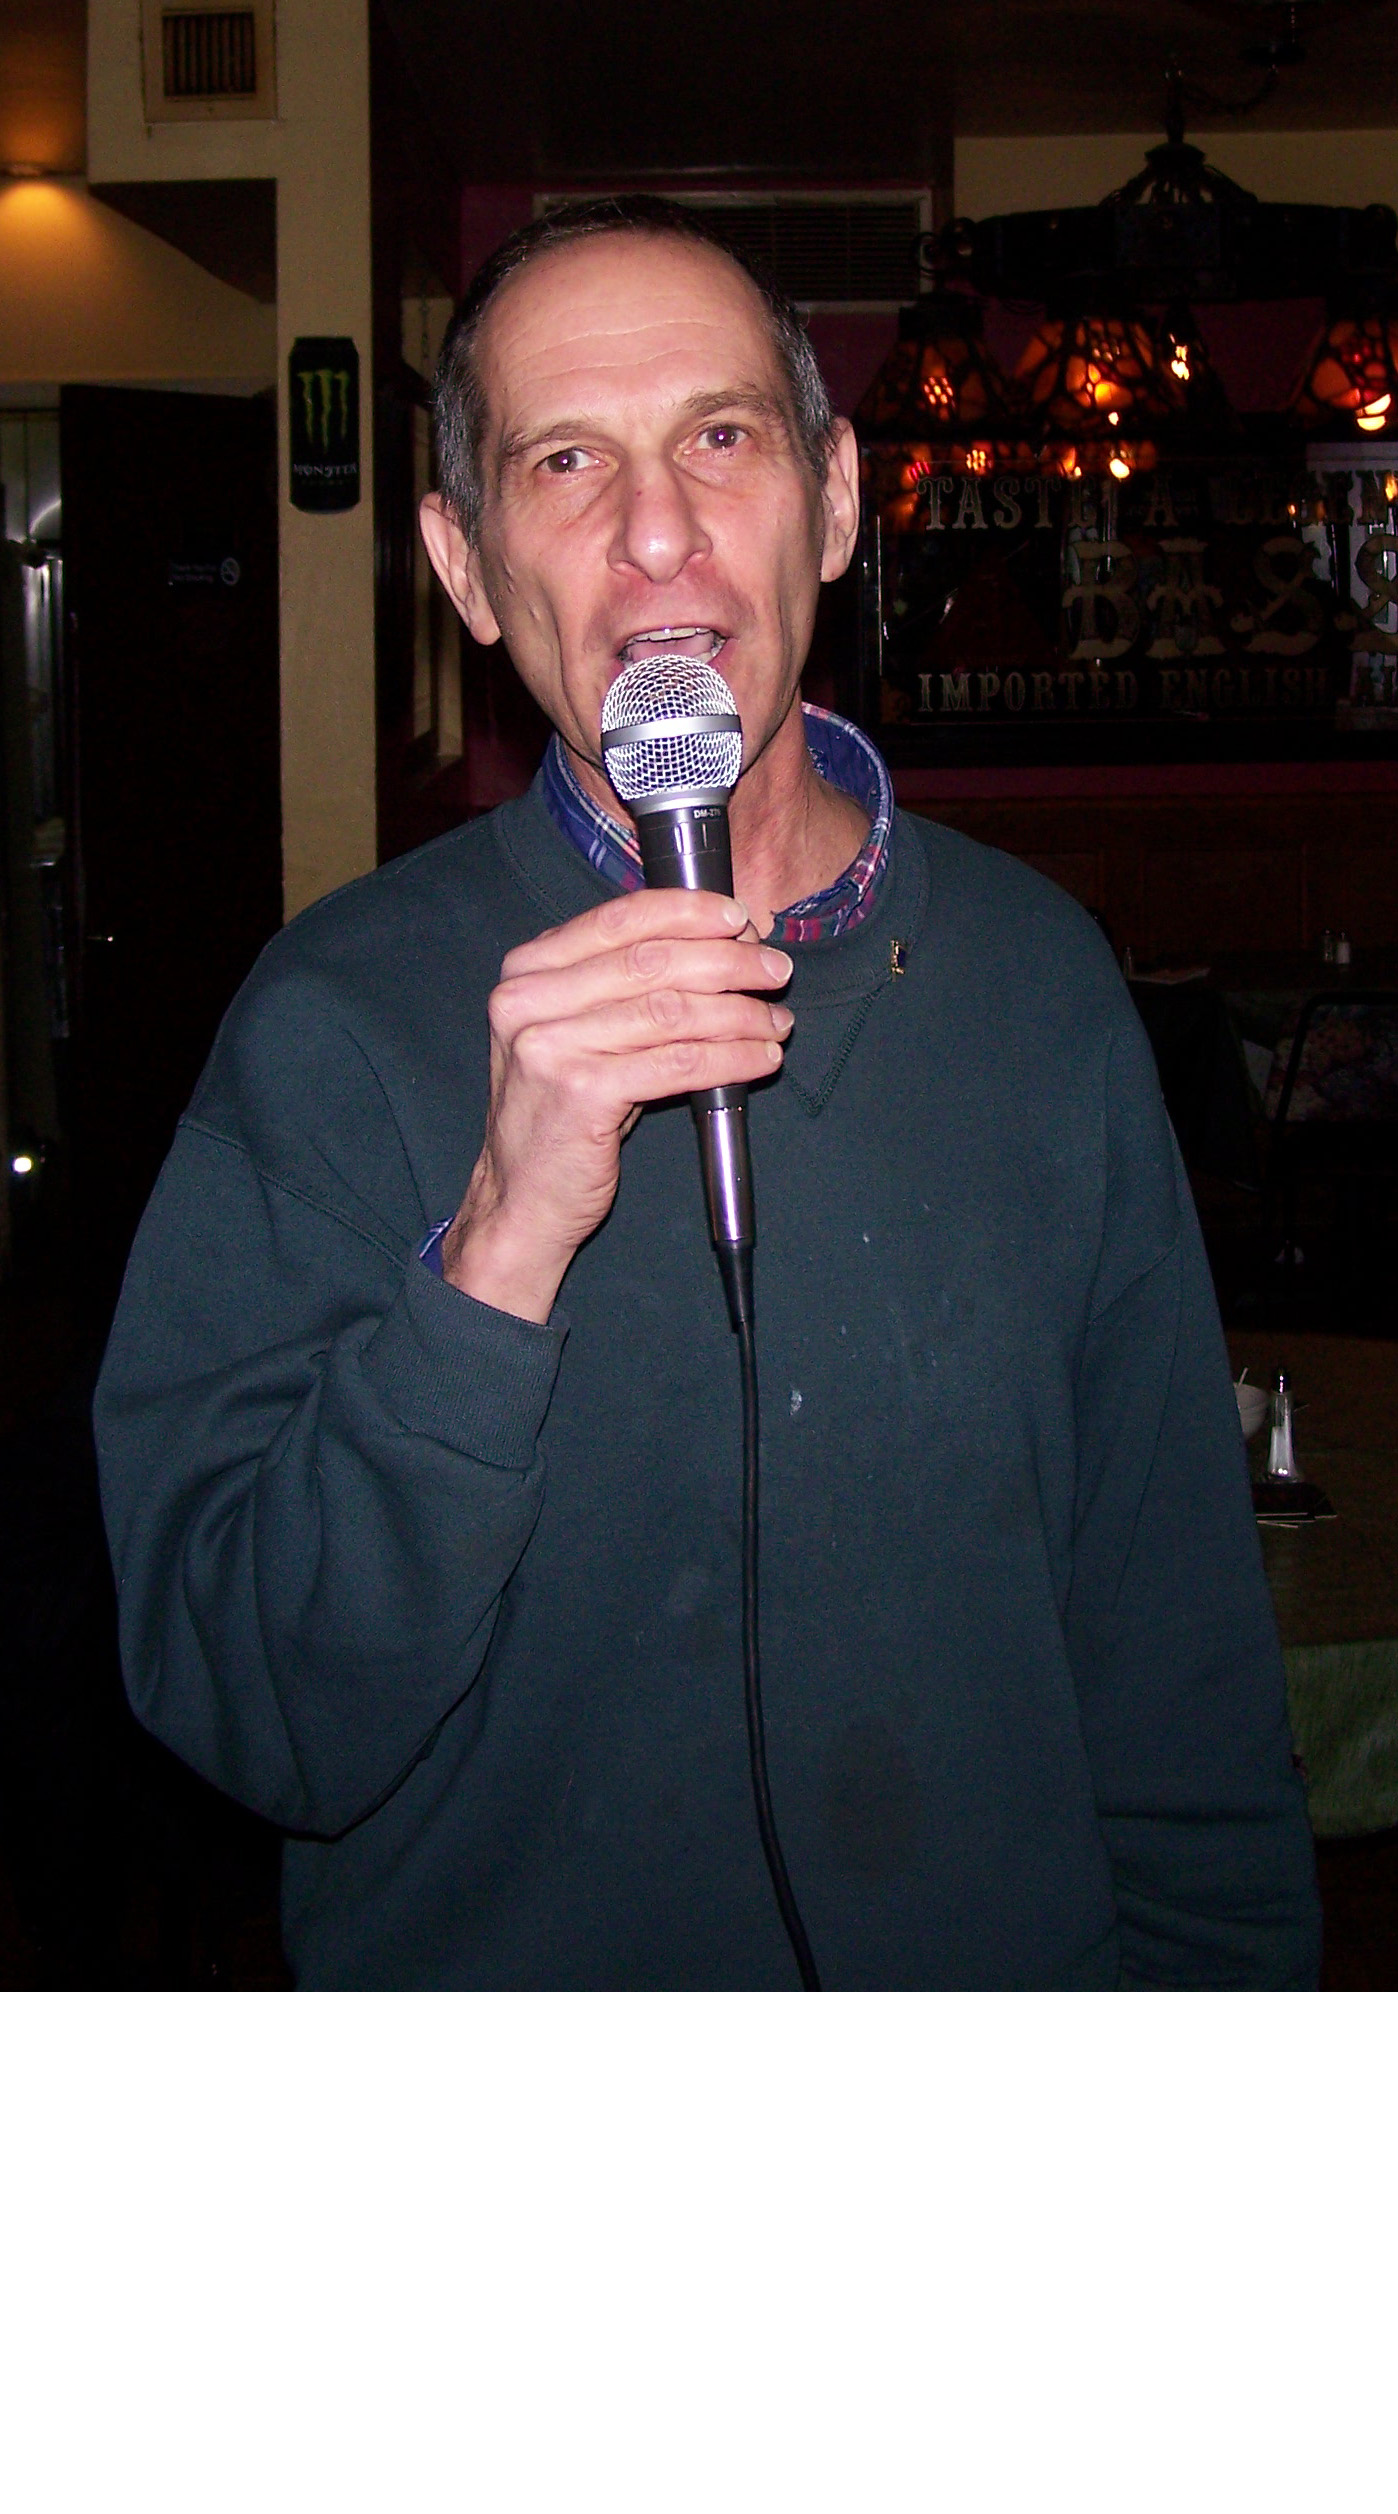 (date posted). Photograph of Phillip W. Weiss taken during a performance in New York City, USA, 2008.